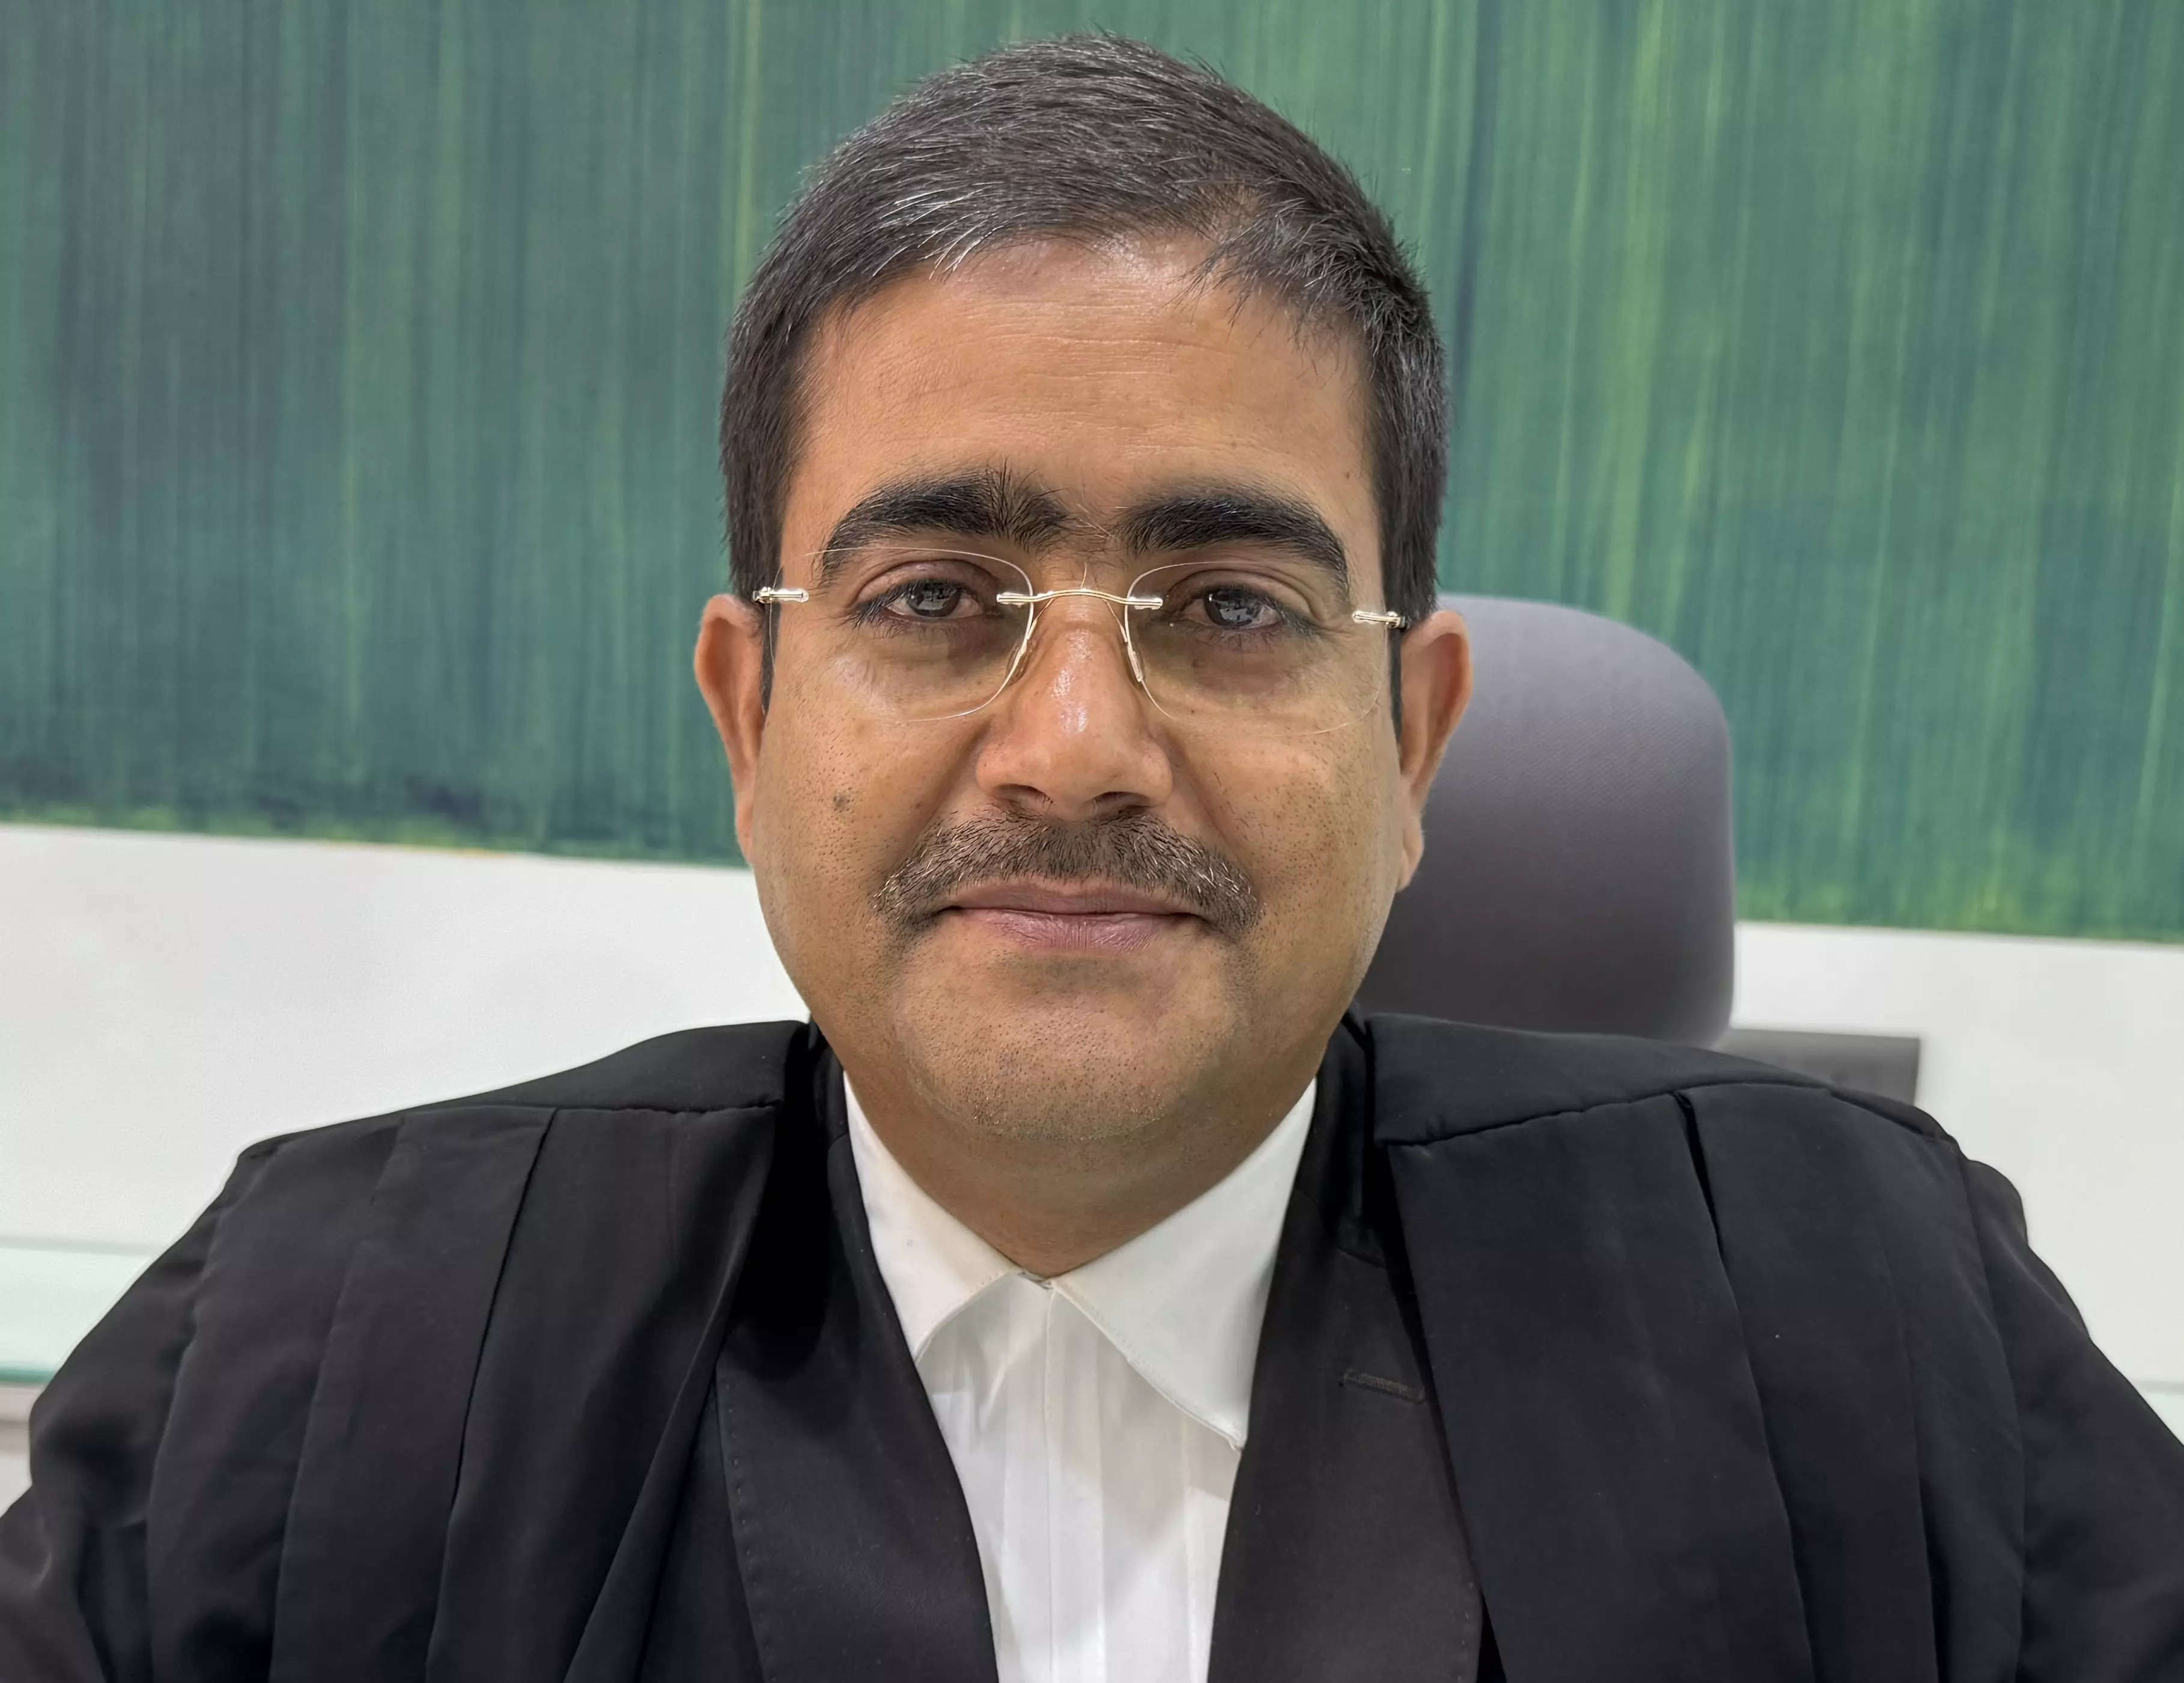 <p>"The Supreme Court has recognized that environmental degradation and pollution violate the fundamental rights of the people. Every individual has the right to live in a safe, clean and healthy environment": Ashwani Kumar Dubey, Advocate-on-Record, Supreme Court of India.</p>